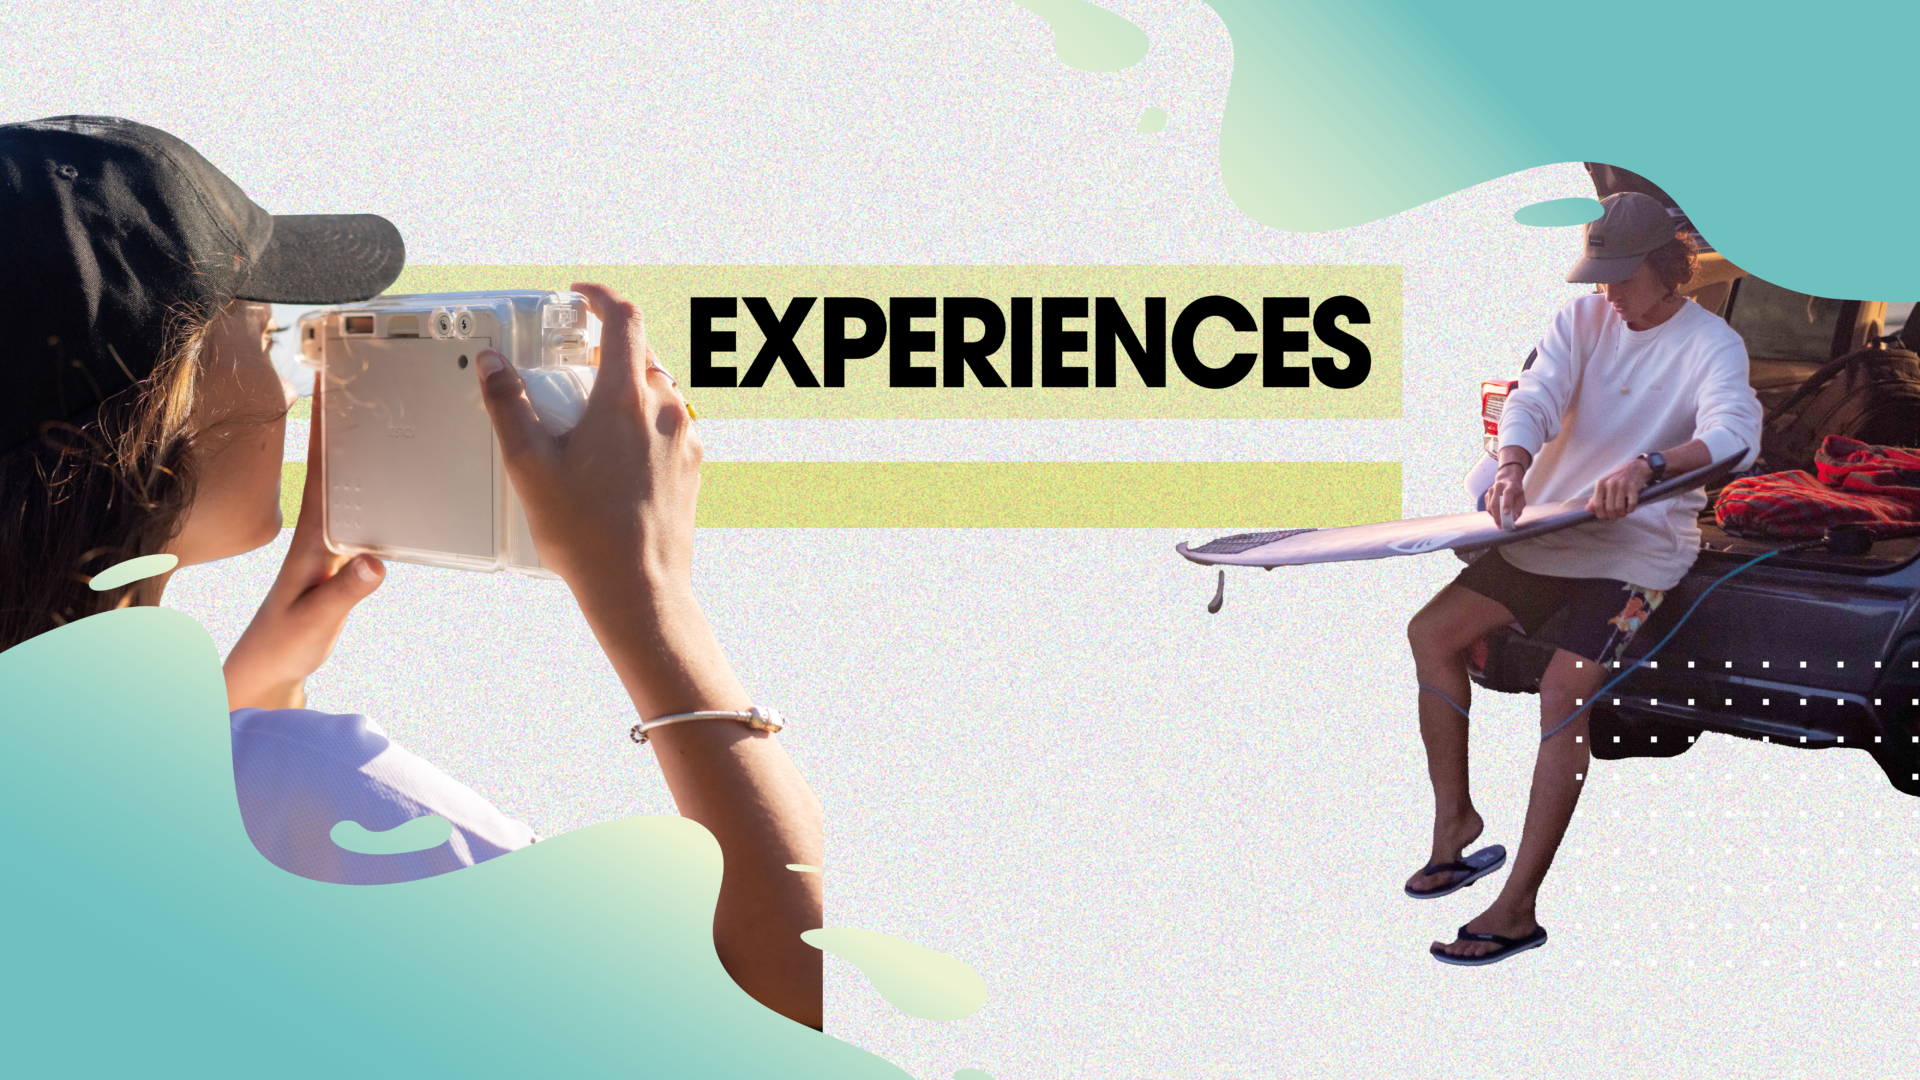 EXPERIENCES BANNER